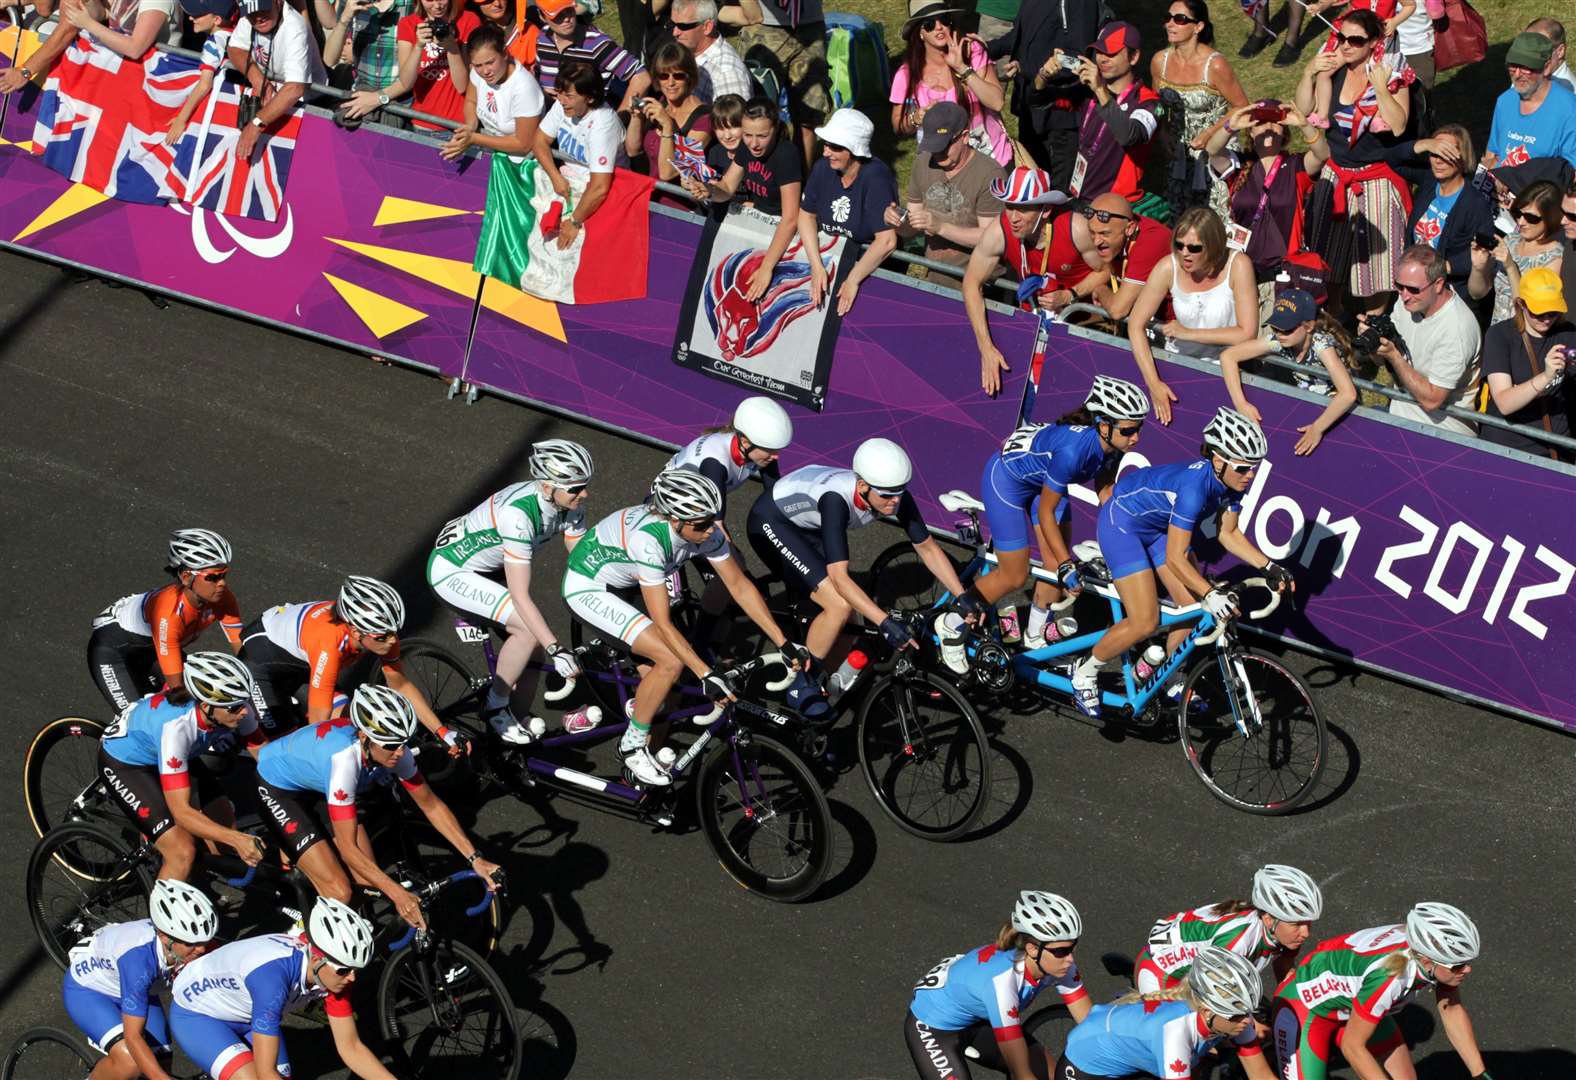 Competitors set out on the Women's Individual B Road Race at Brands Hatch during the Paralympics in 2012. Picture: Gareth Fuller/PA Wire